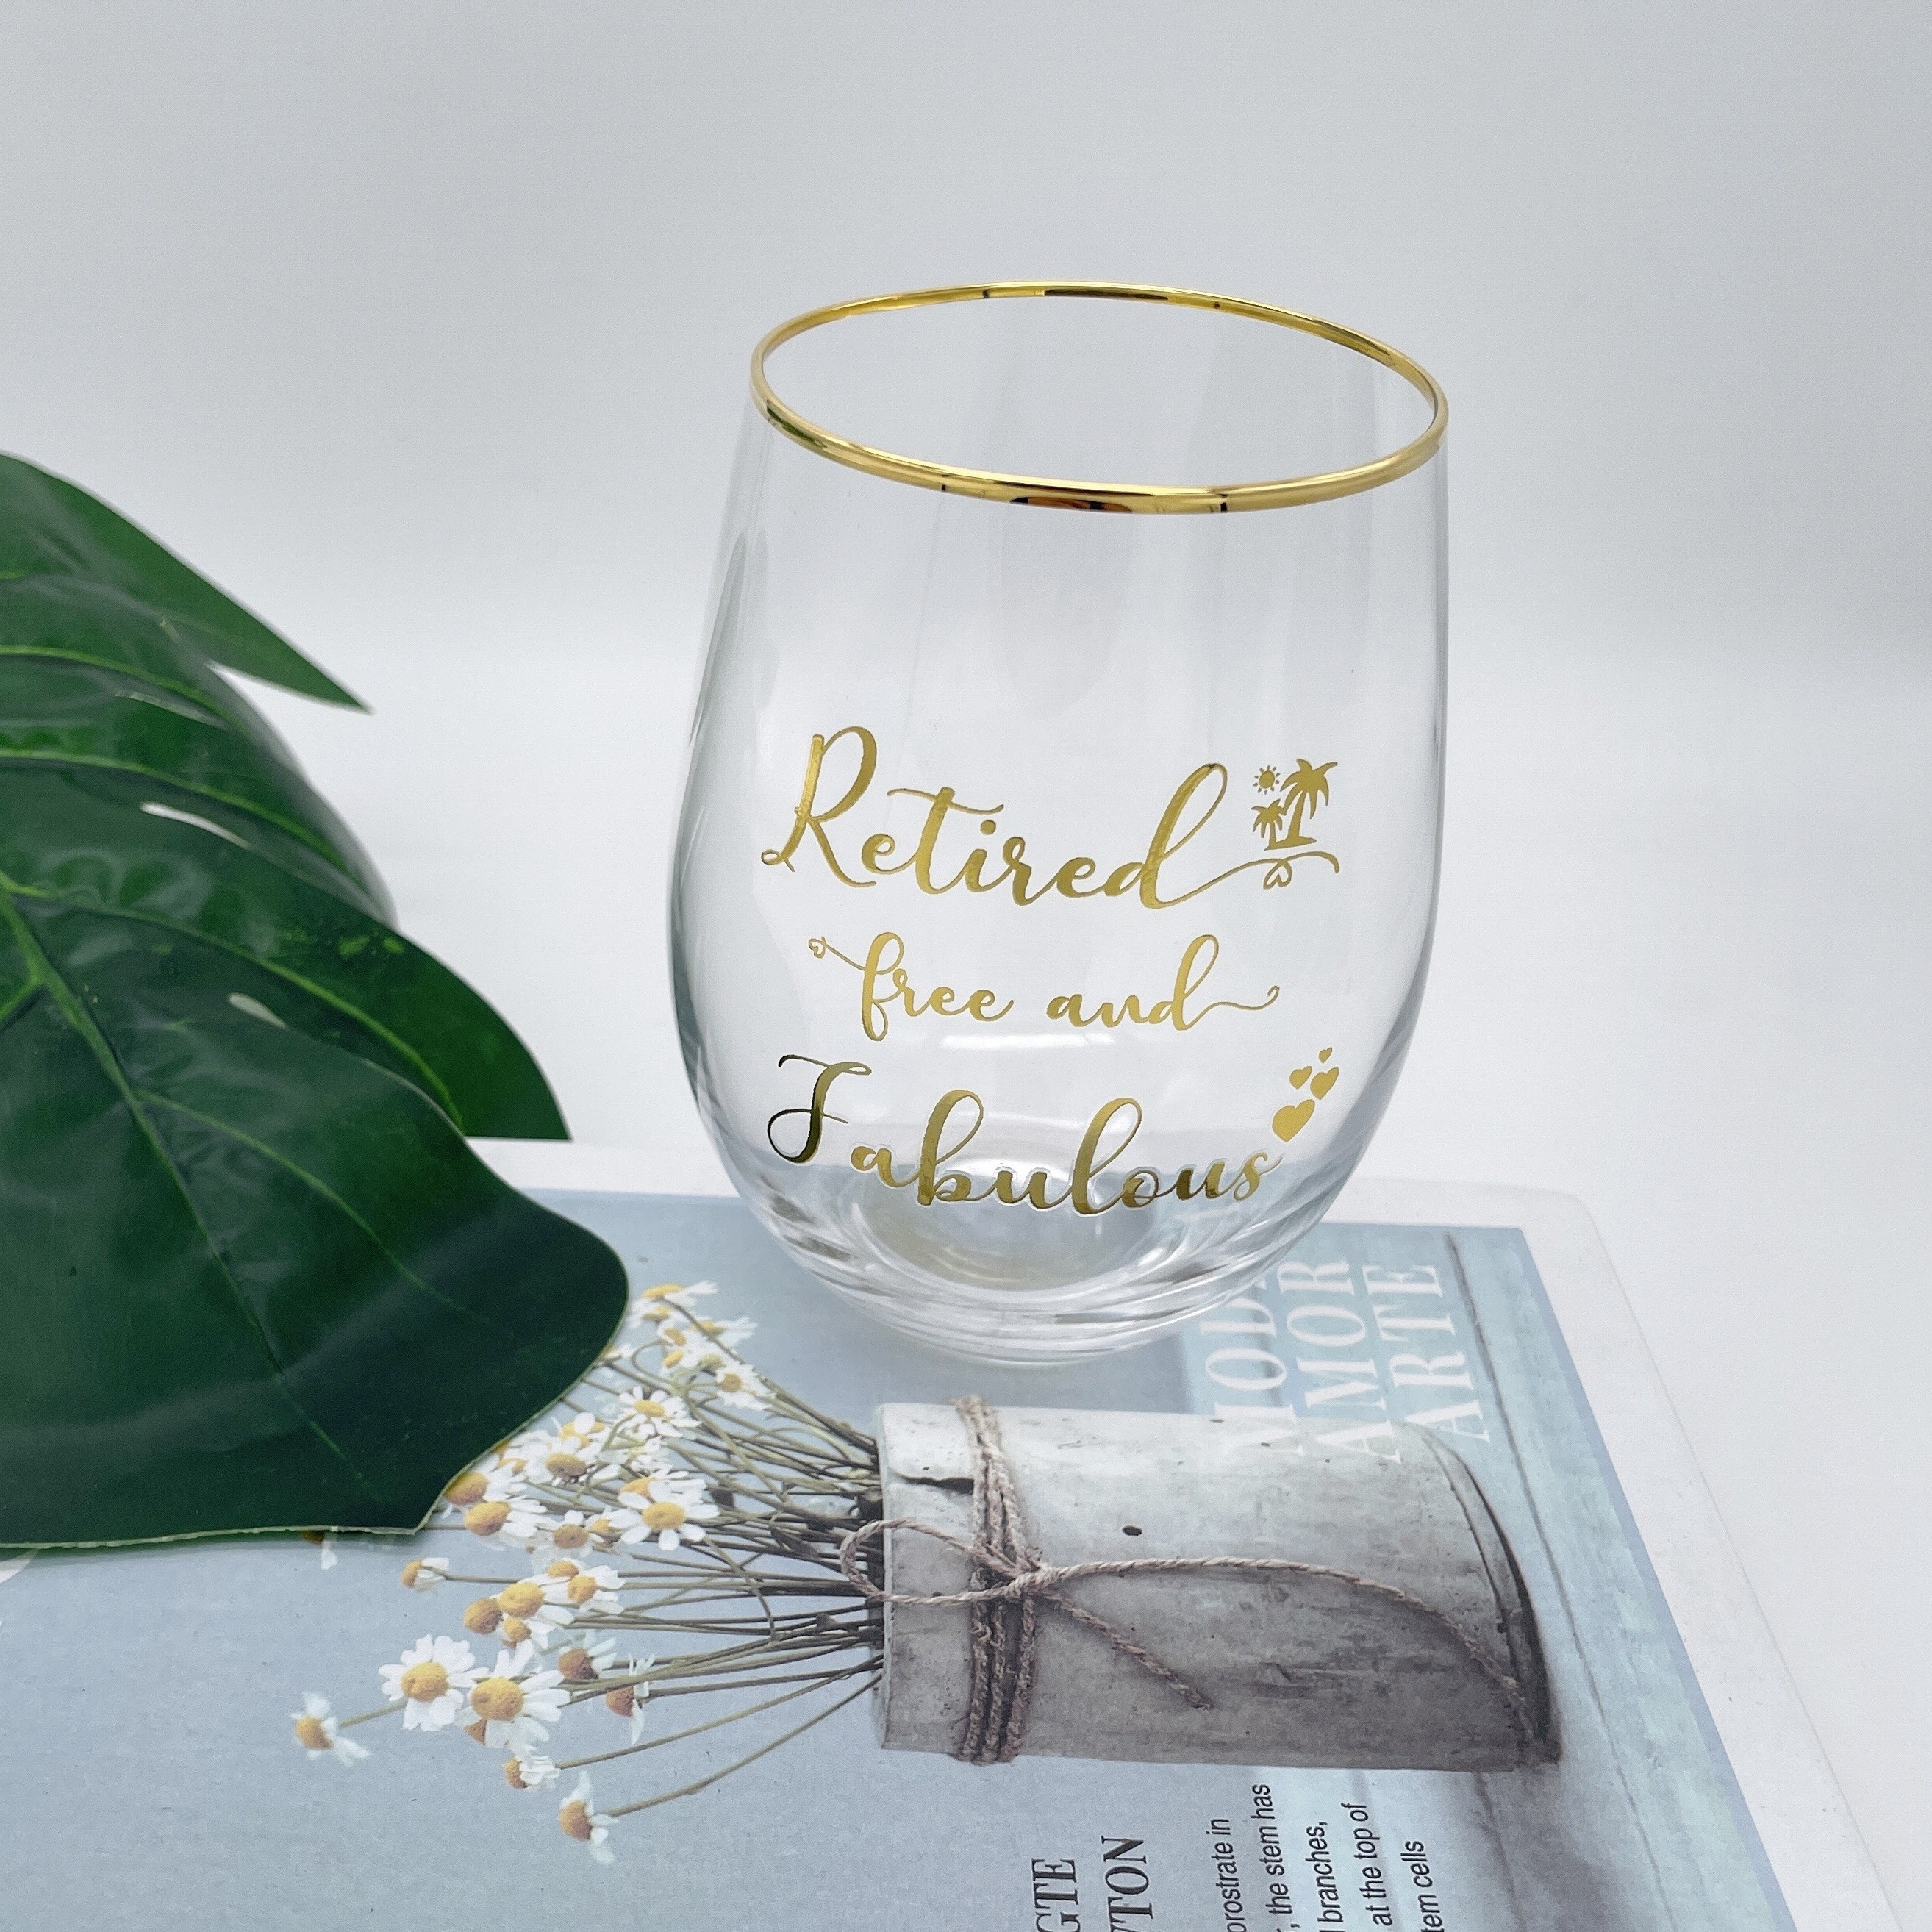 Mom Wine Glass, Reasons to Wine Glass, Mother's Day Wine Tumbler, Engraved  Gift, Gift for Mom, Funny Wine Glass, Stemless Wine Glass Tumbler 